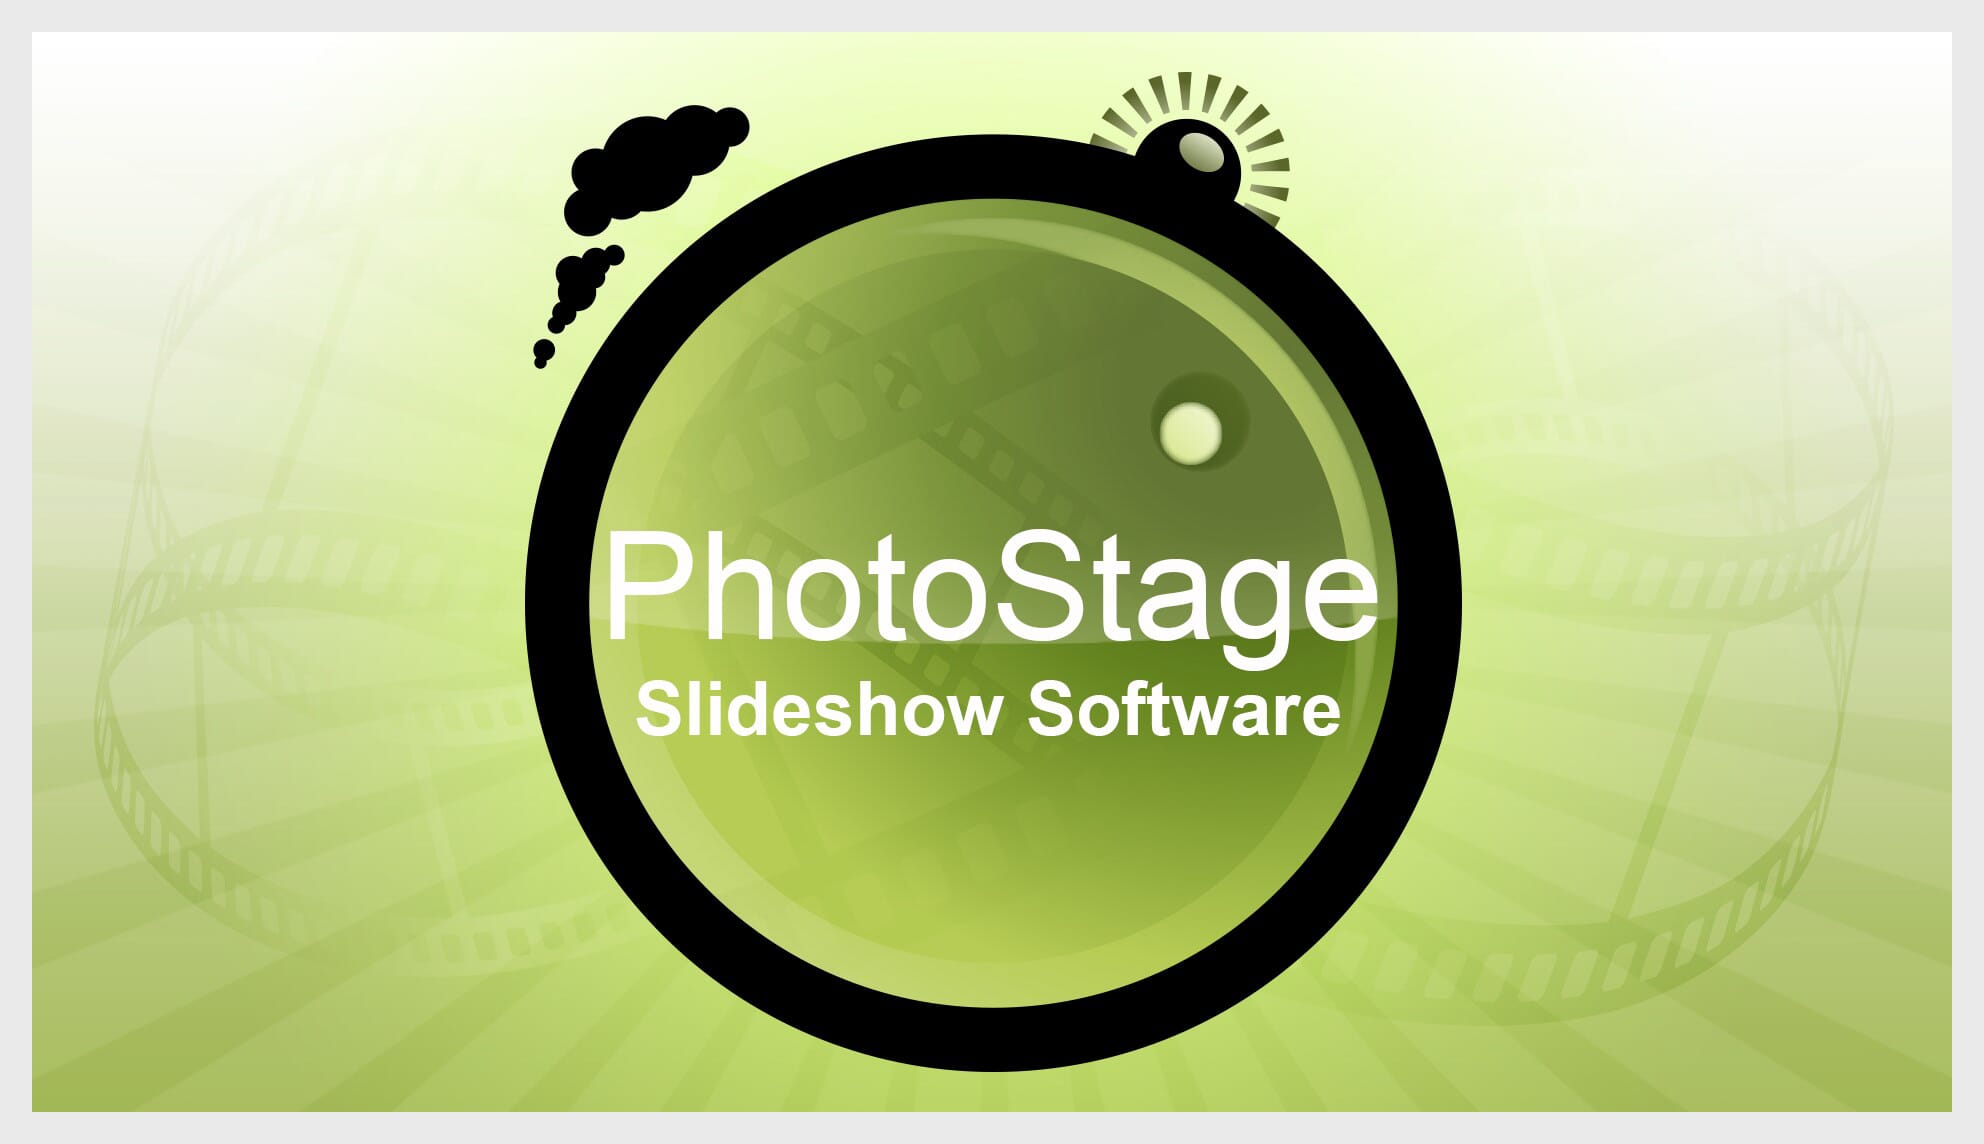 Photostage is a simplistic slideshow software offering both free and paid services.